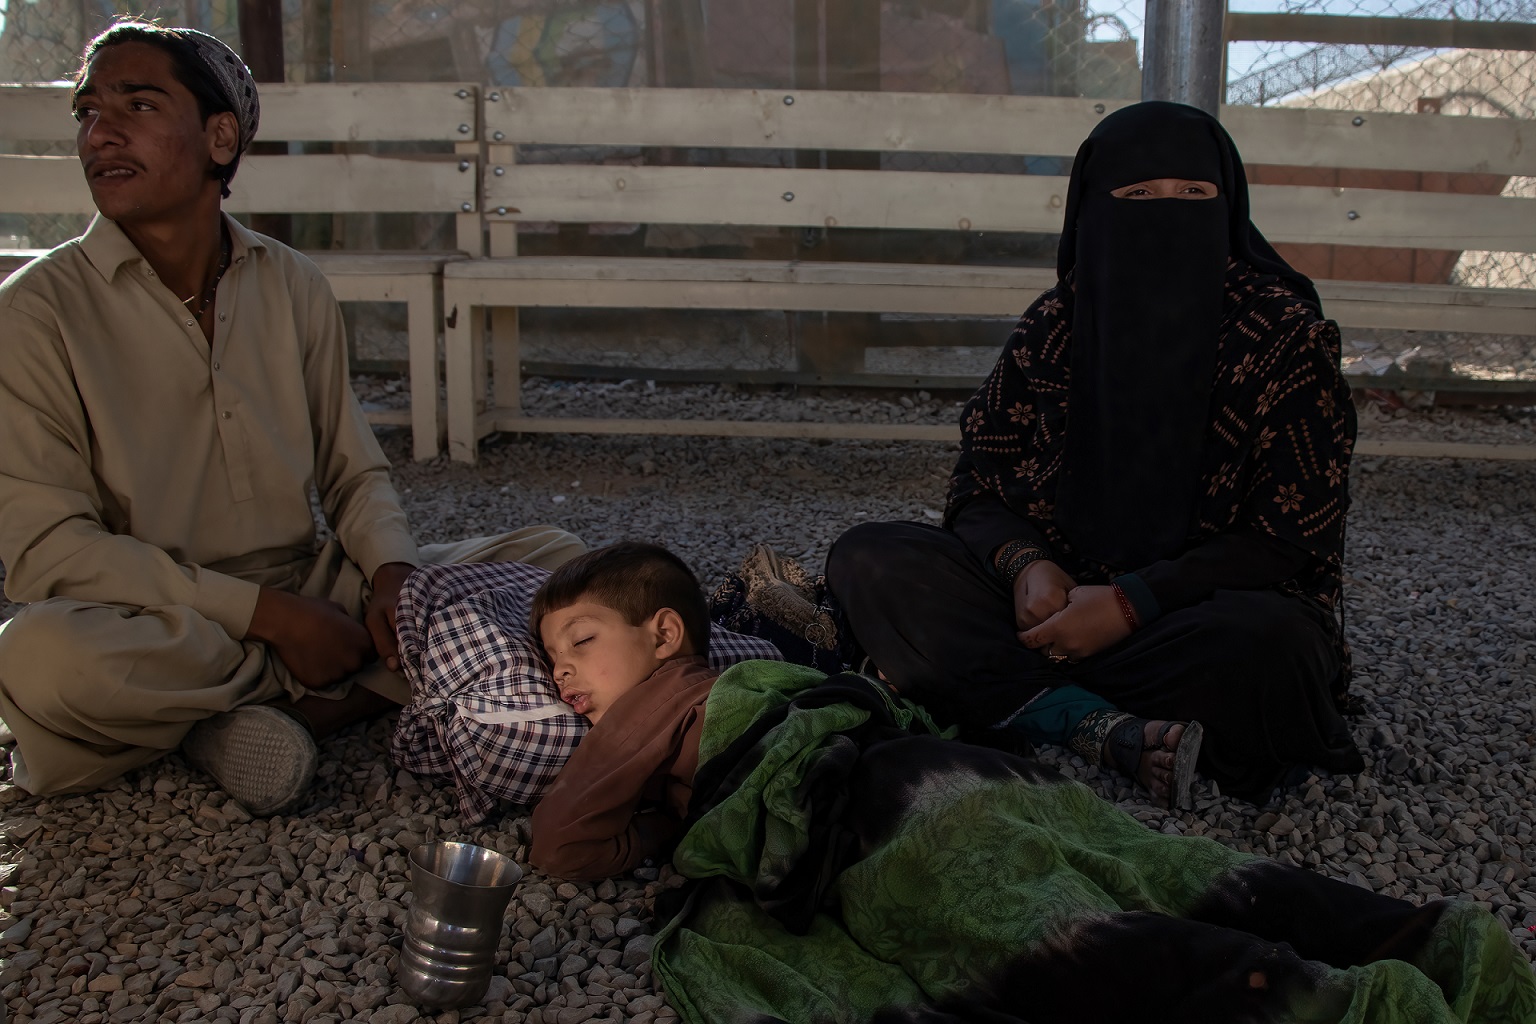 An Afghan family sitting outside. The kid is sleeping on pebbles.